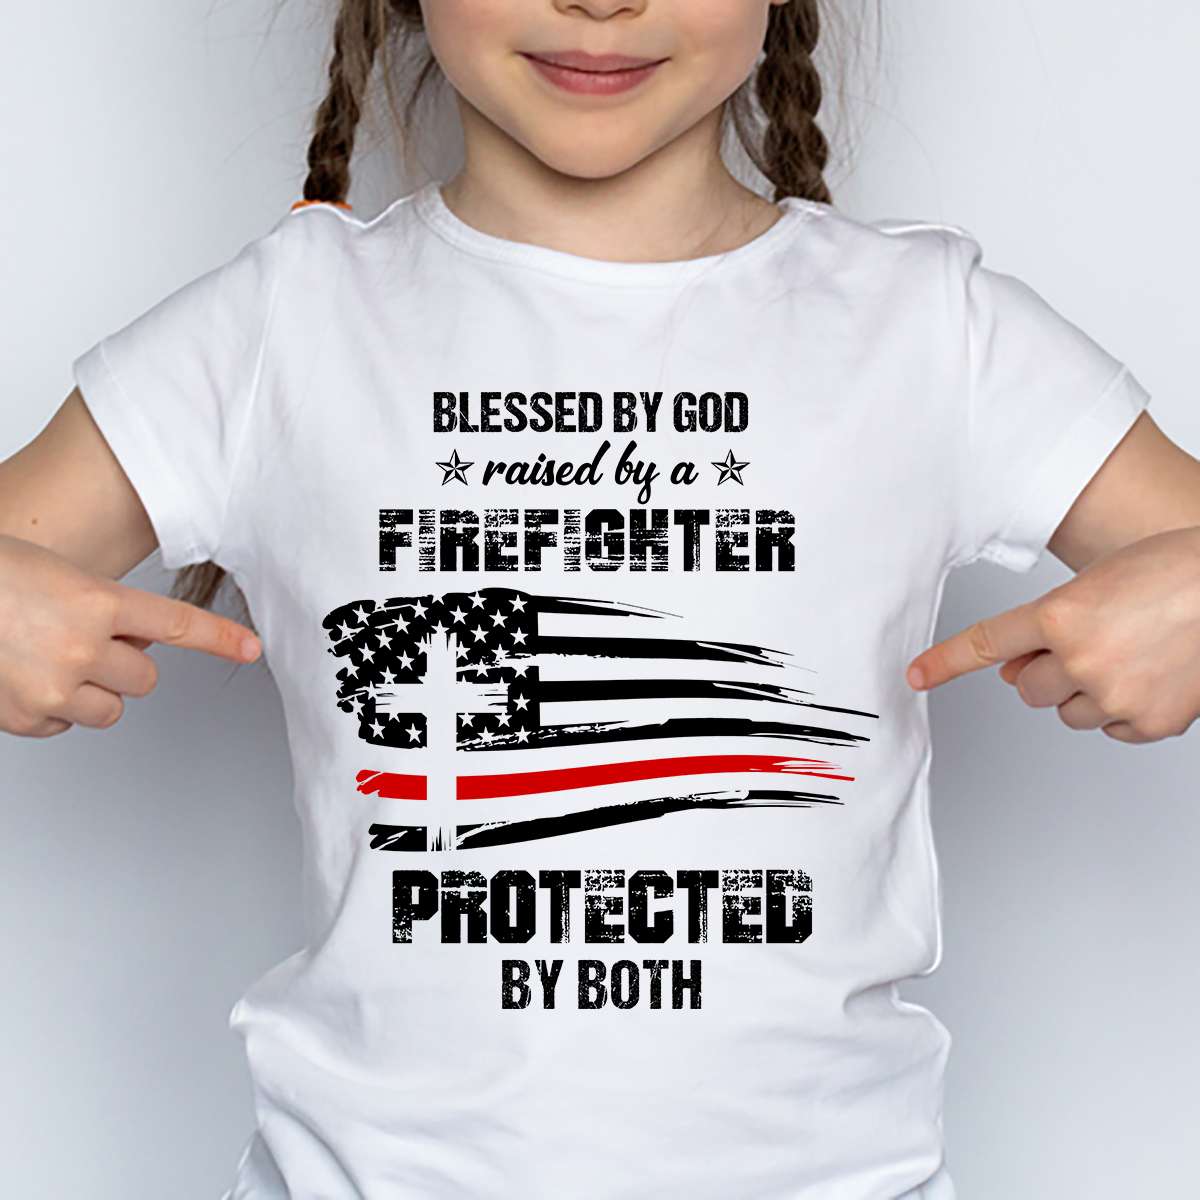 Blessed by god, raised by firefighter, protected by both - American firefighter father